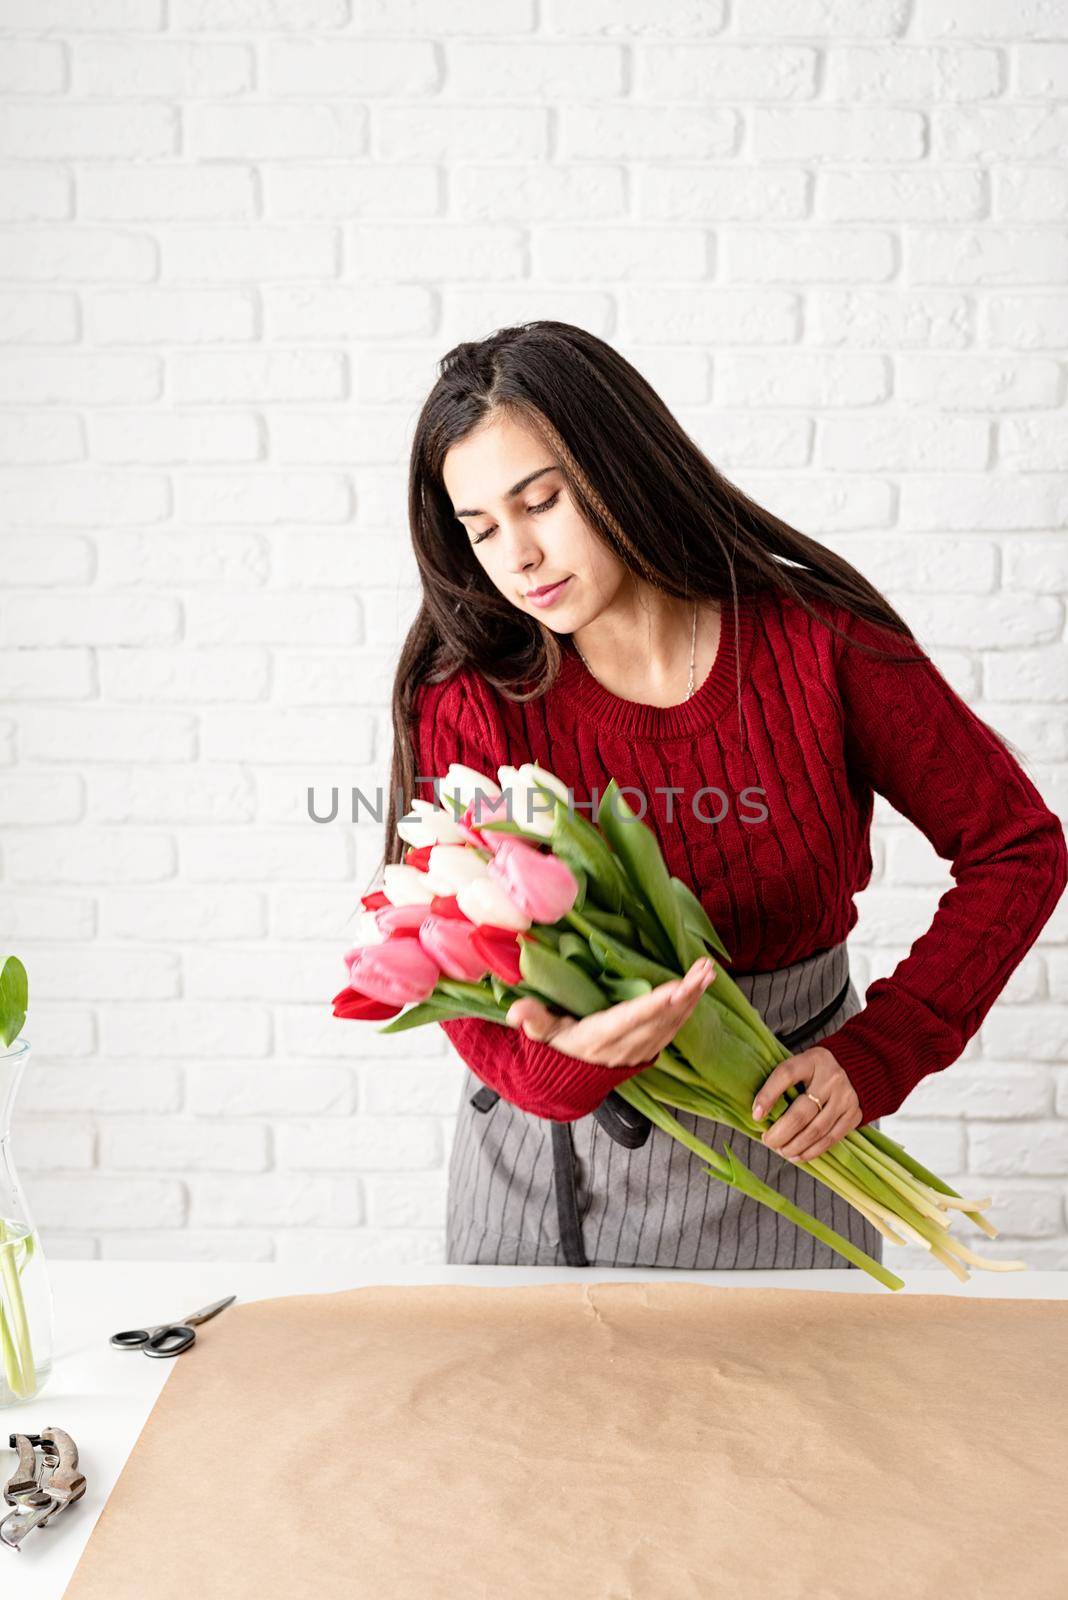 Valentine's Day and Women's Day. Small business. Woman florist making a bouquet of fresh colorful tulips